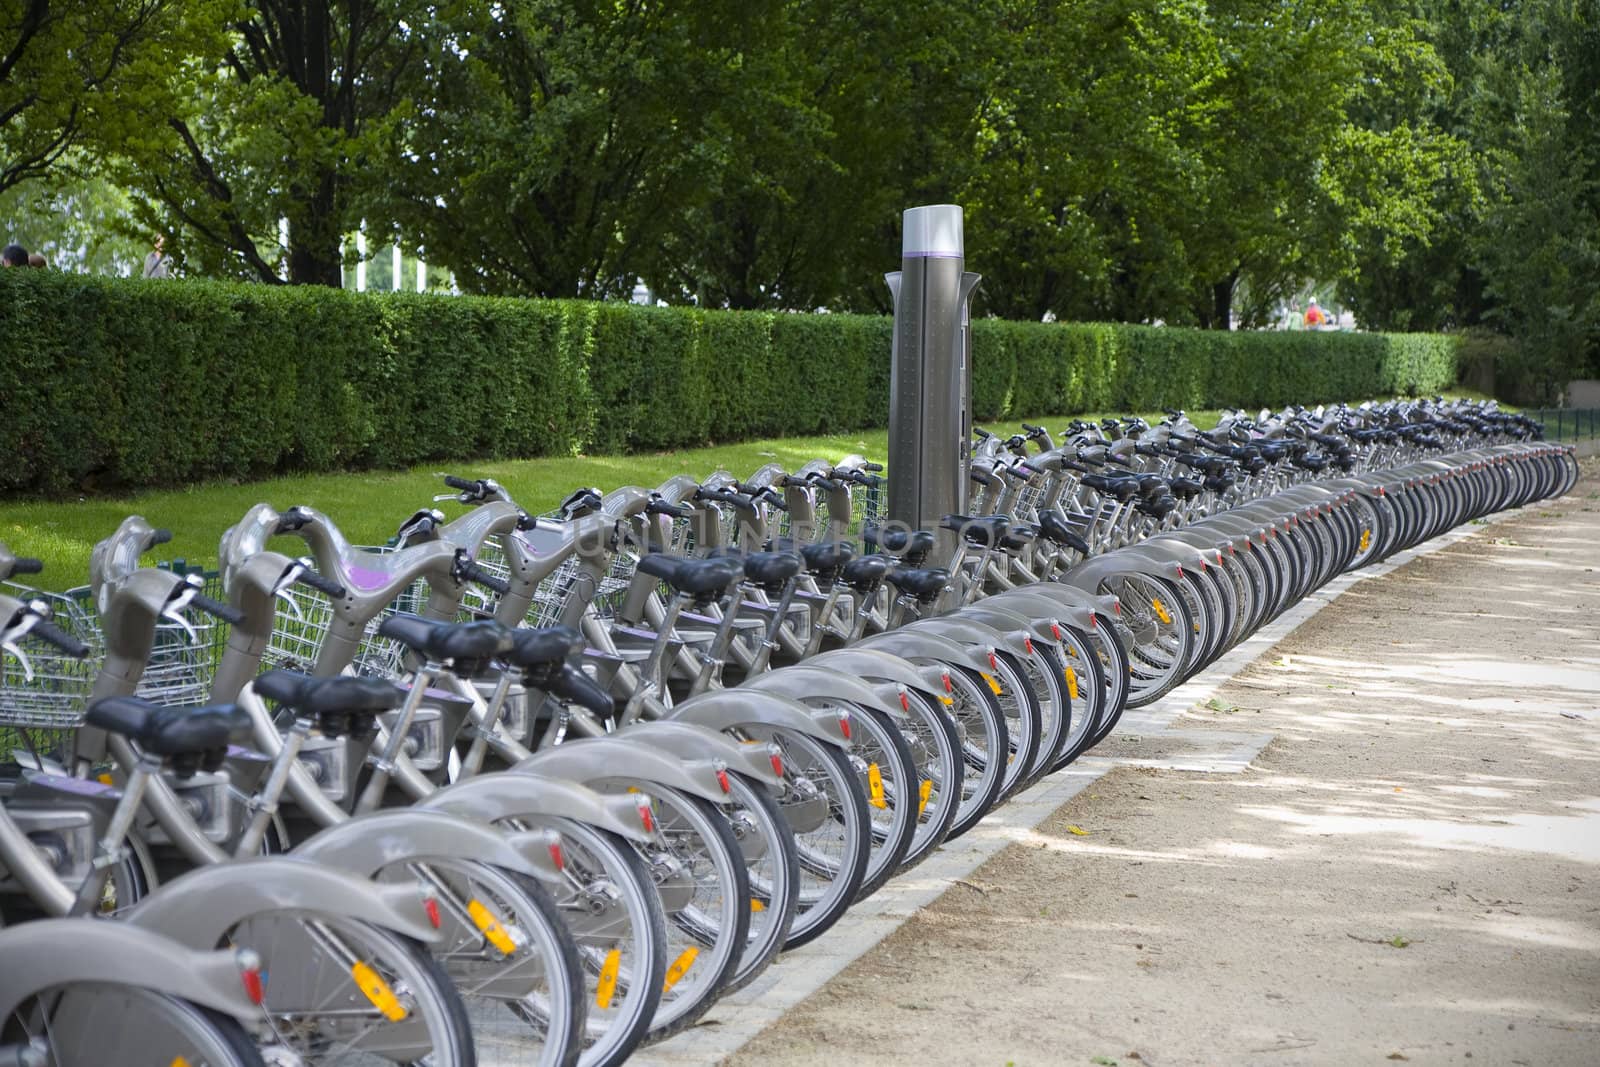 Row of bicycles for hire - Paris, France.